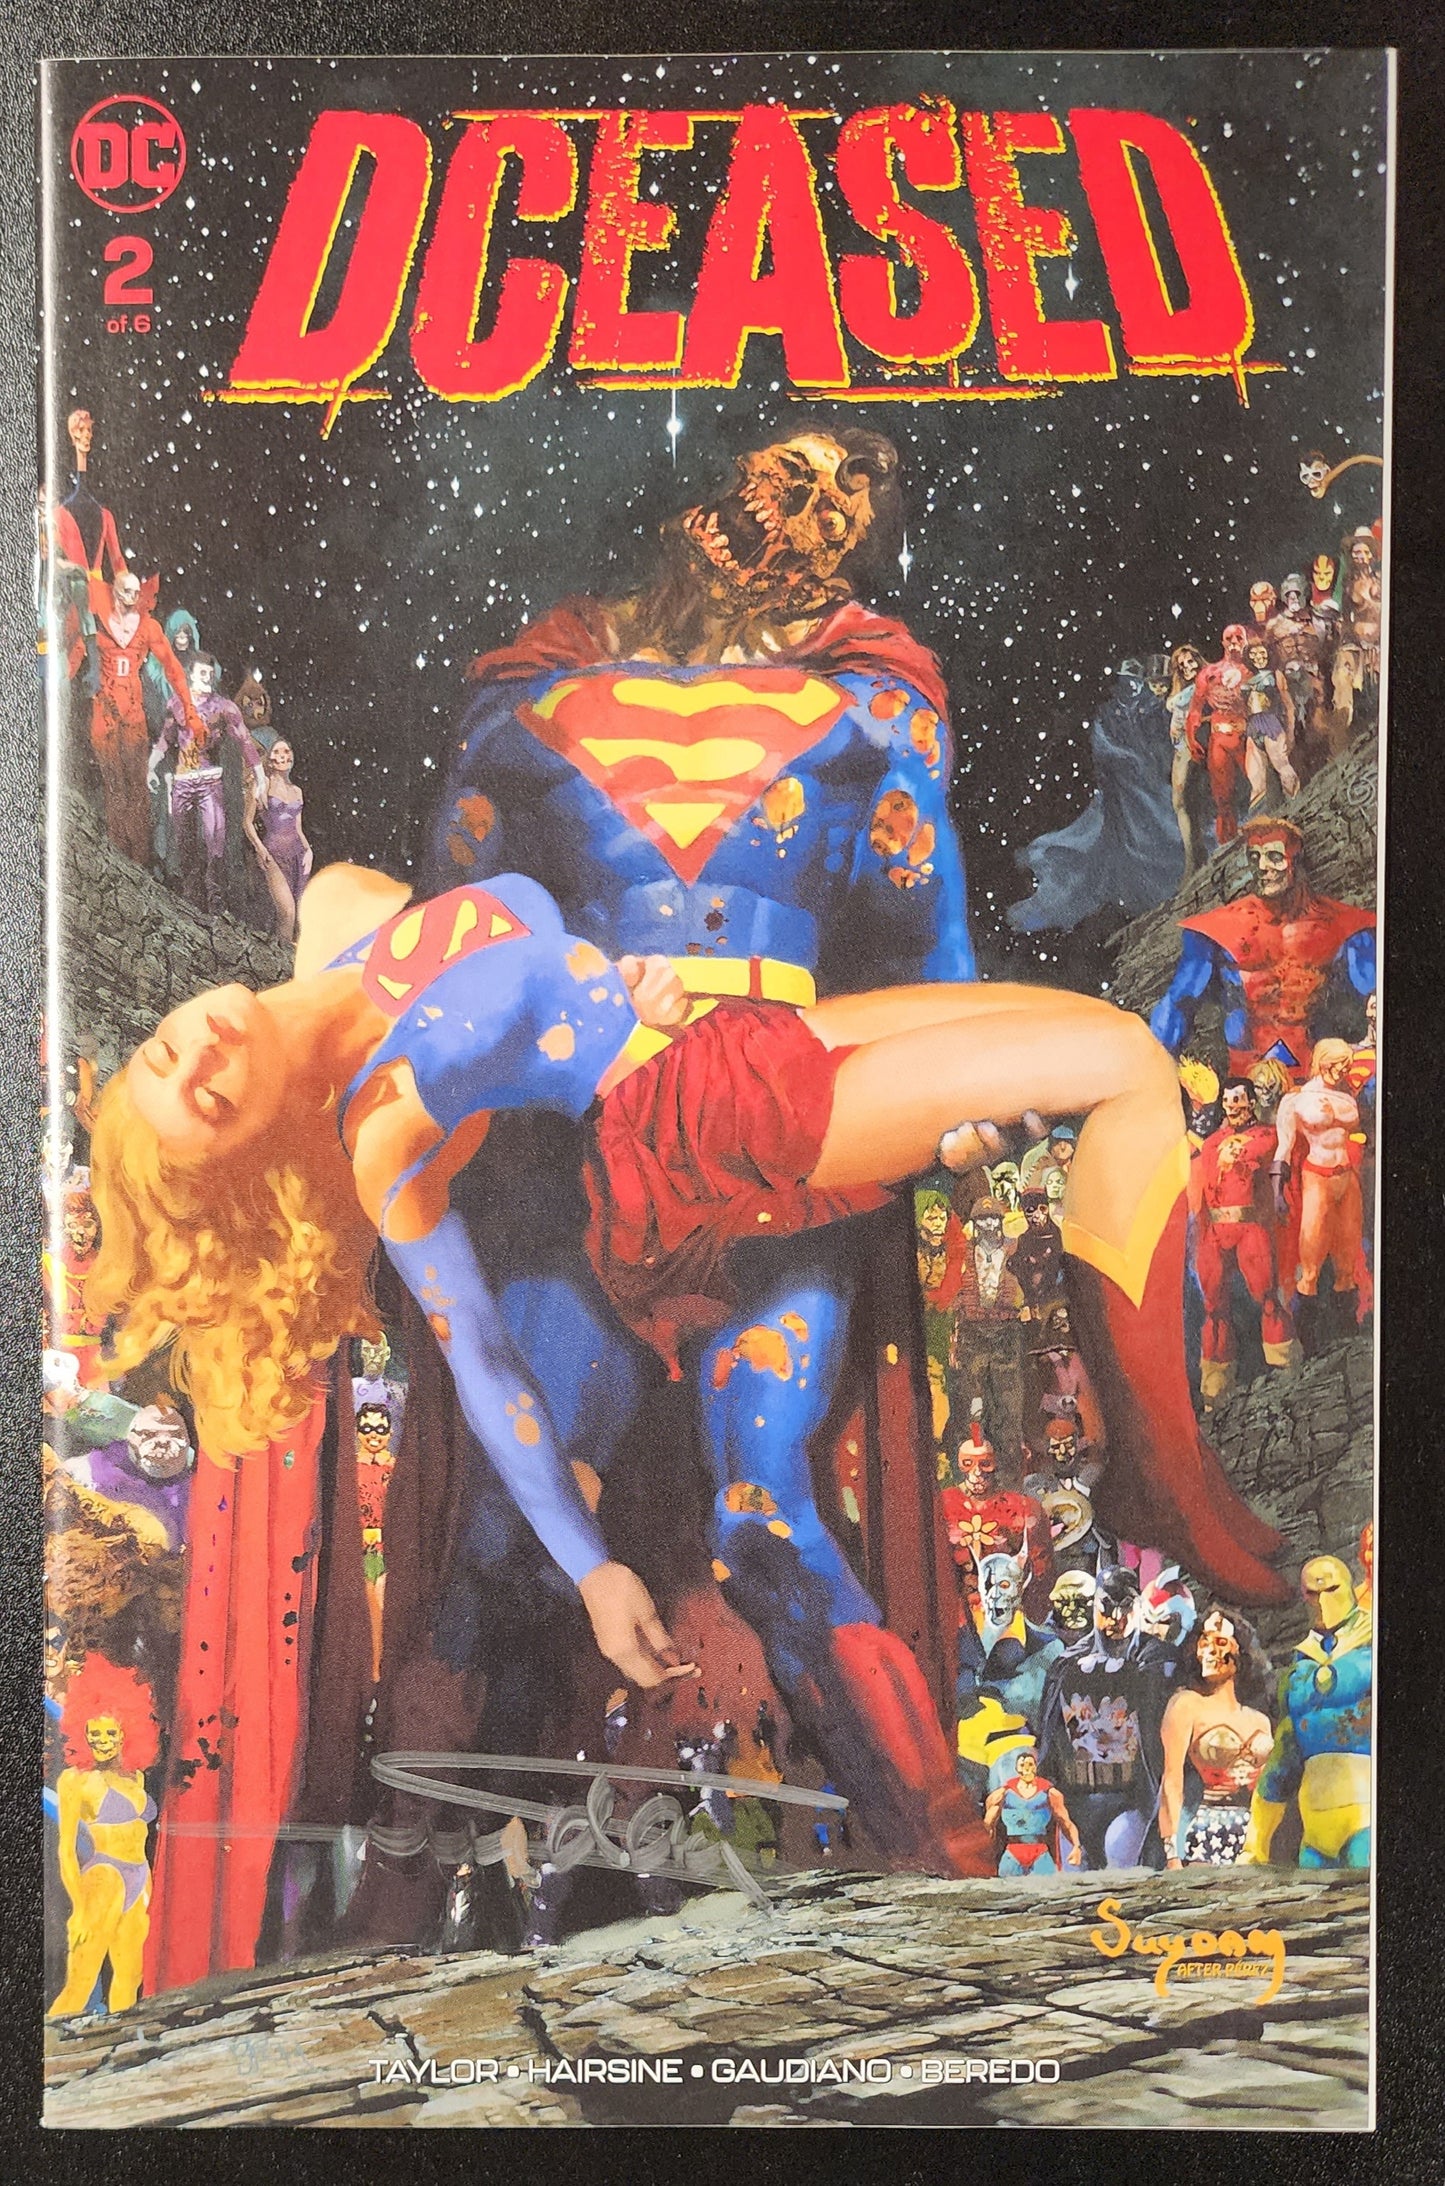 DCEASED #2 HOMAGE VARIANT SIGNED BY ARTHUR SUYDAM